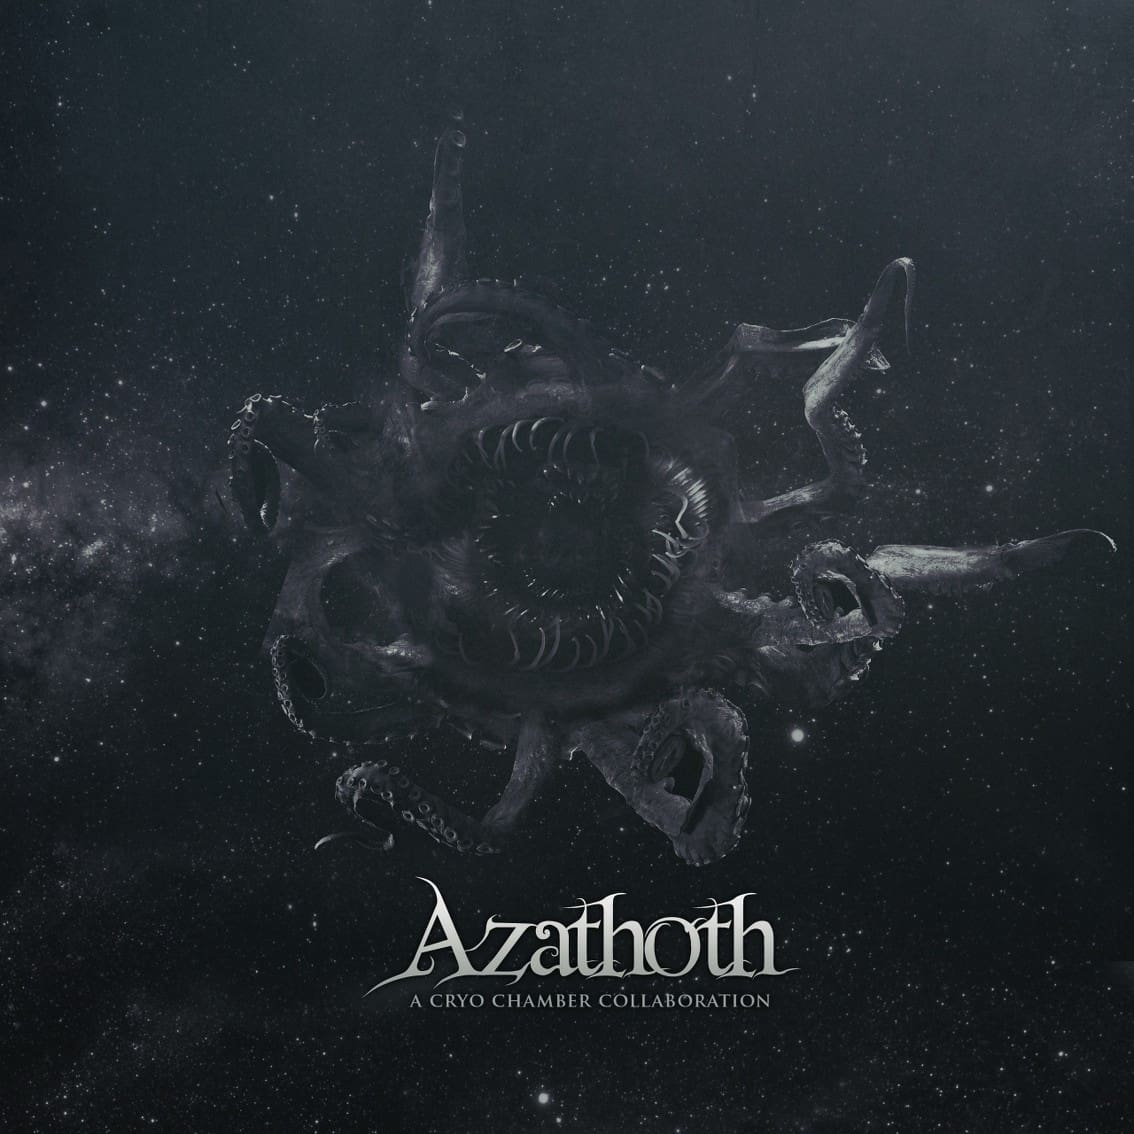 The largest dark ambient collaboration to date, 'Cthulhu', gets a follow up with over 20 artists on 'Azathoth'